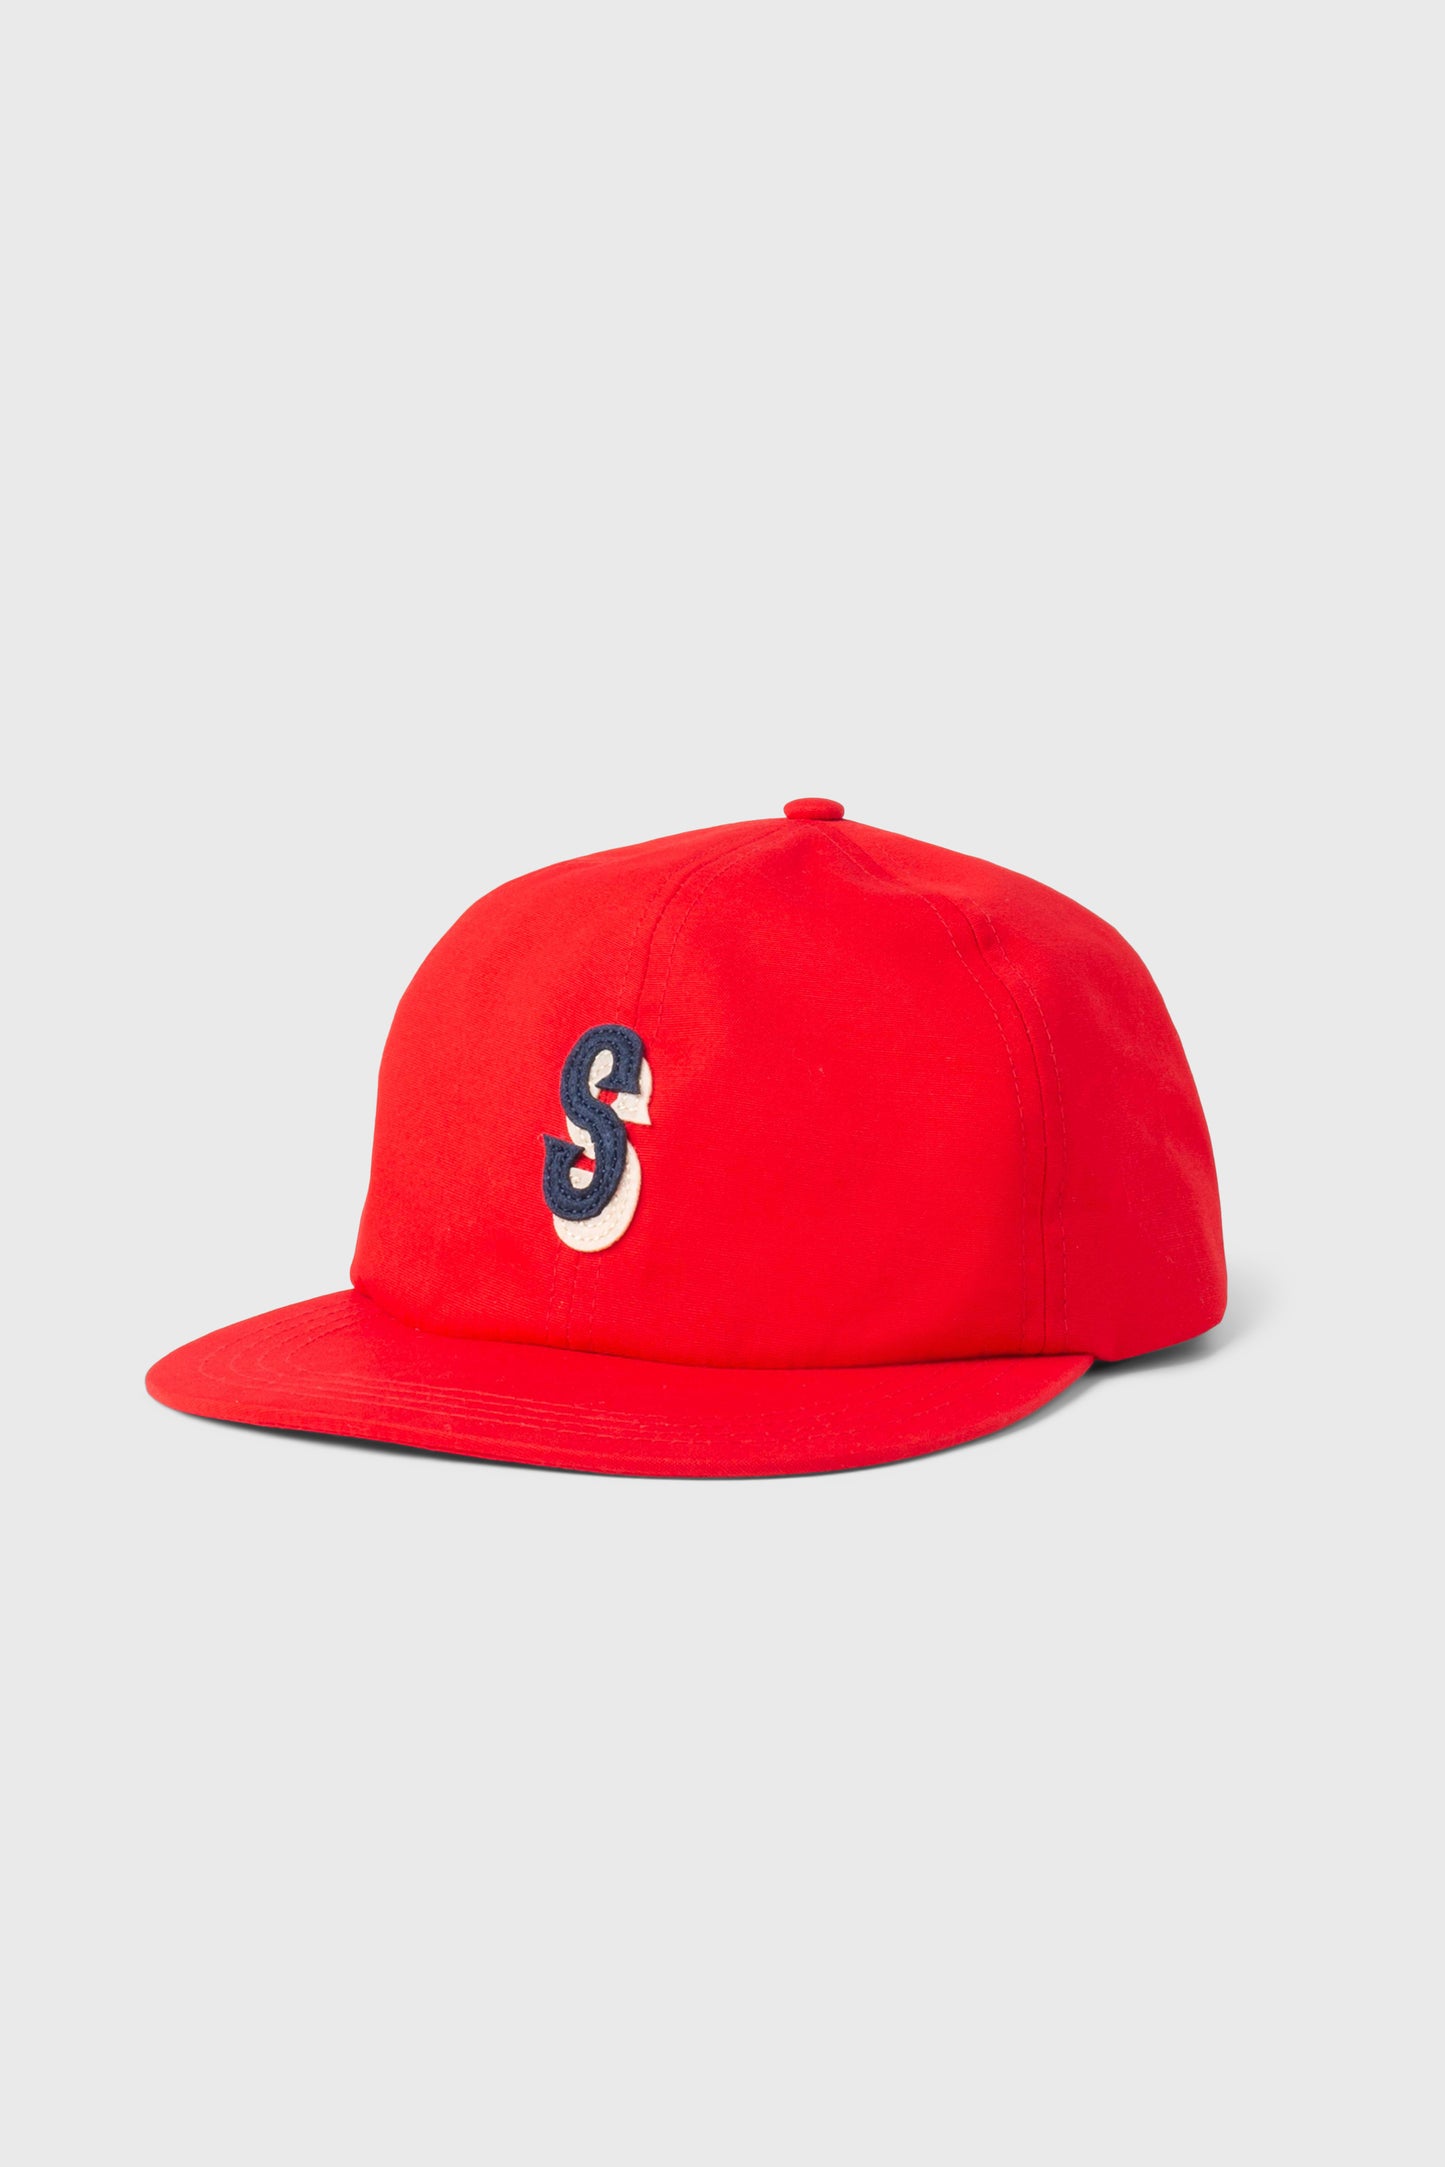 Ball Cap (Red) – Stan Ray